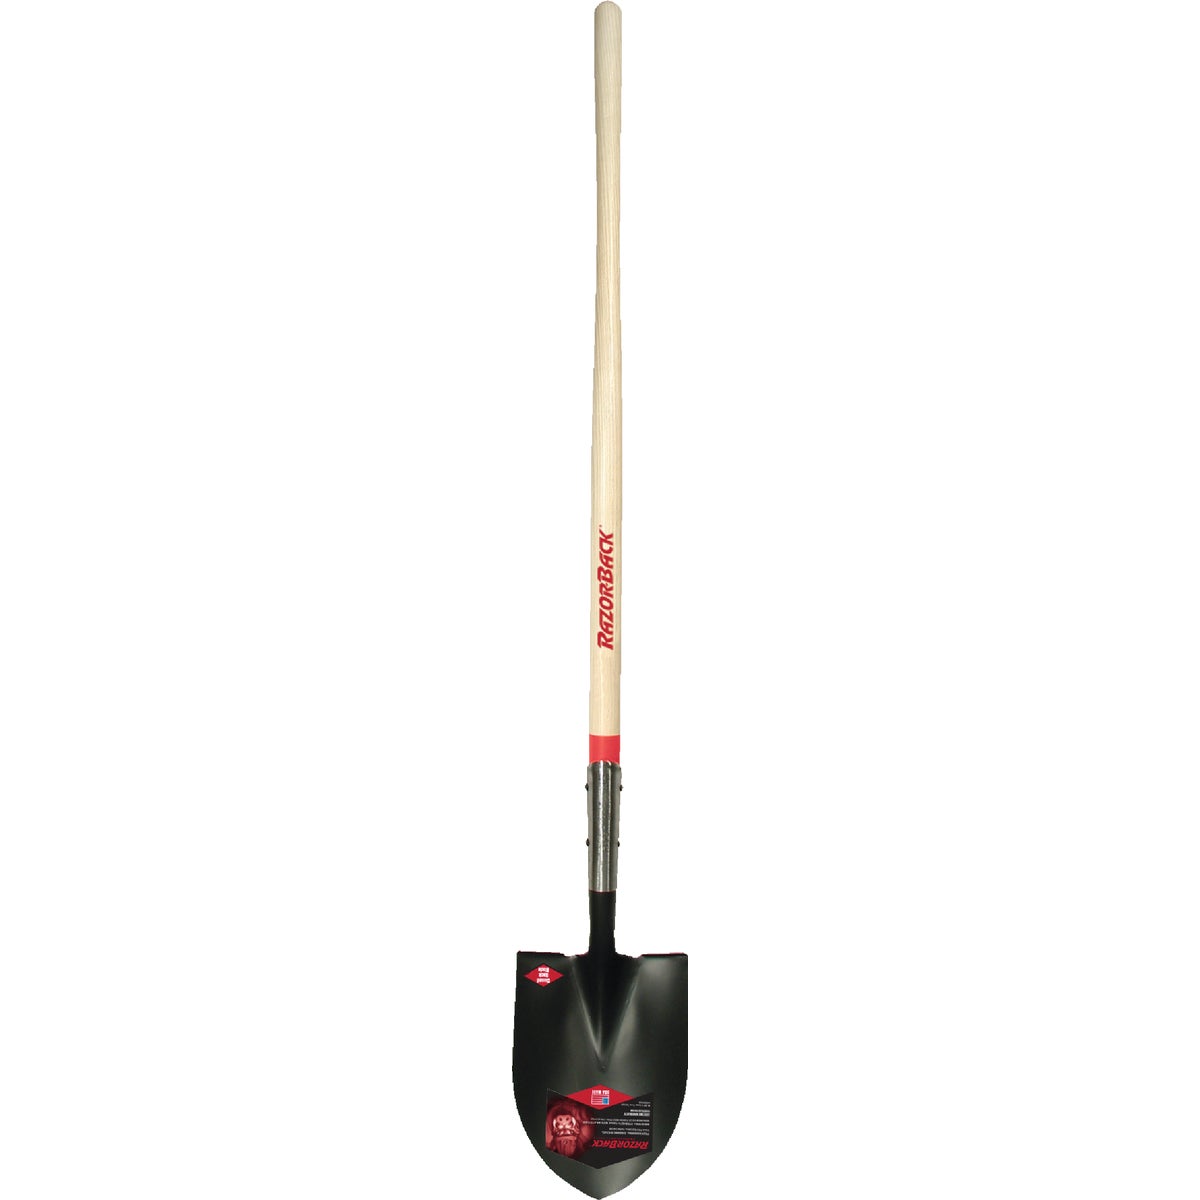 Item 700584, Dig in hard, rocky soil with heavy-duty closed back, #2 steel blade.